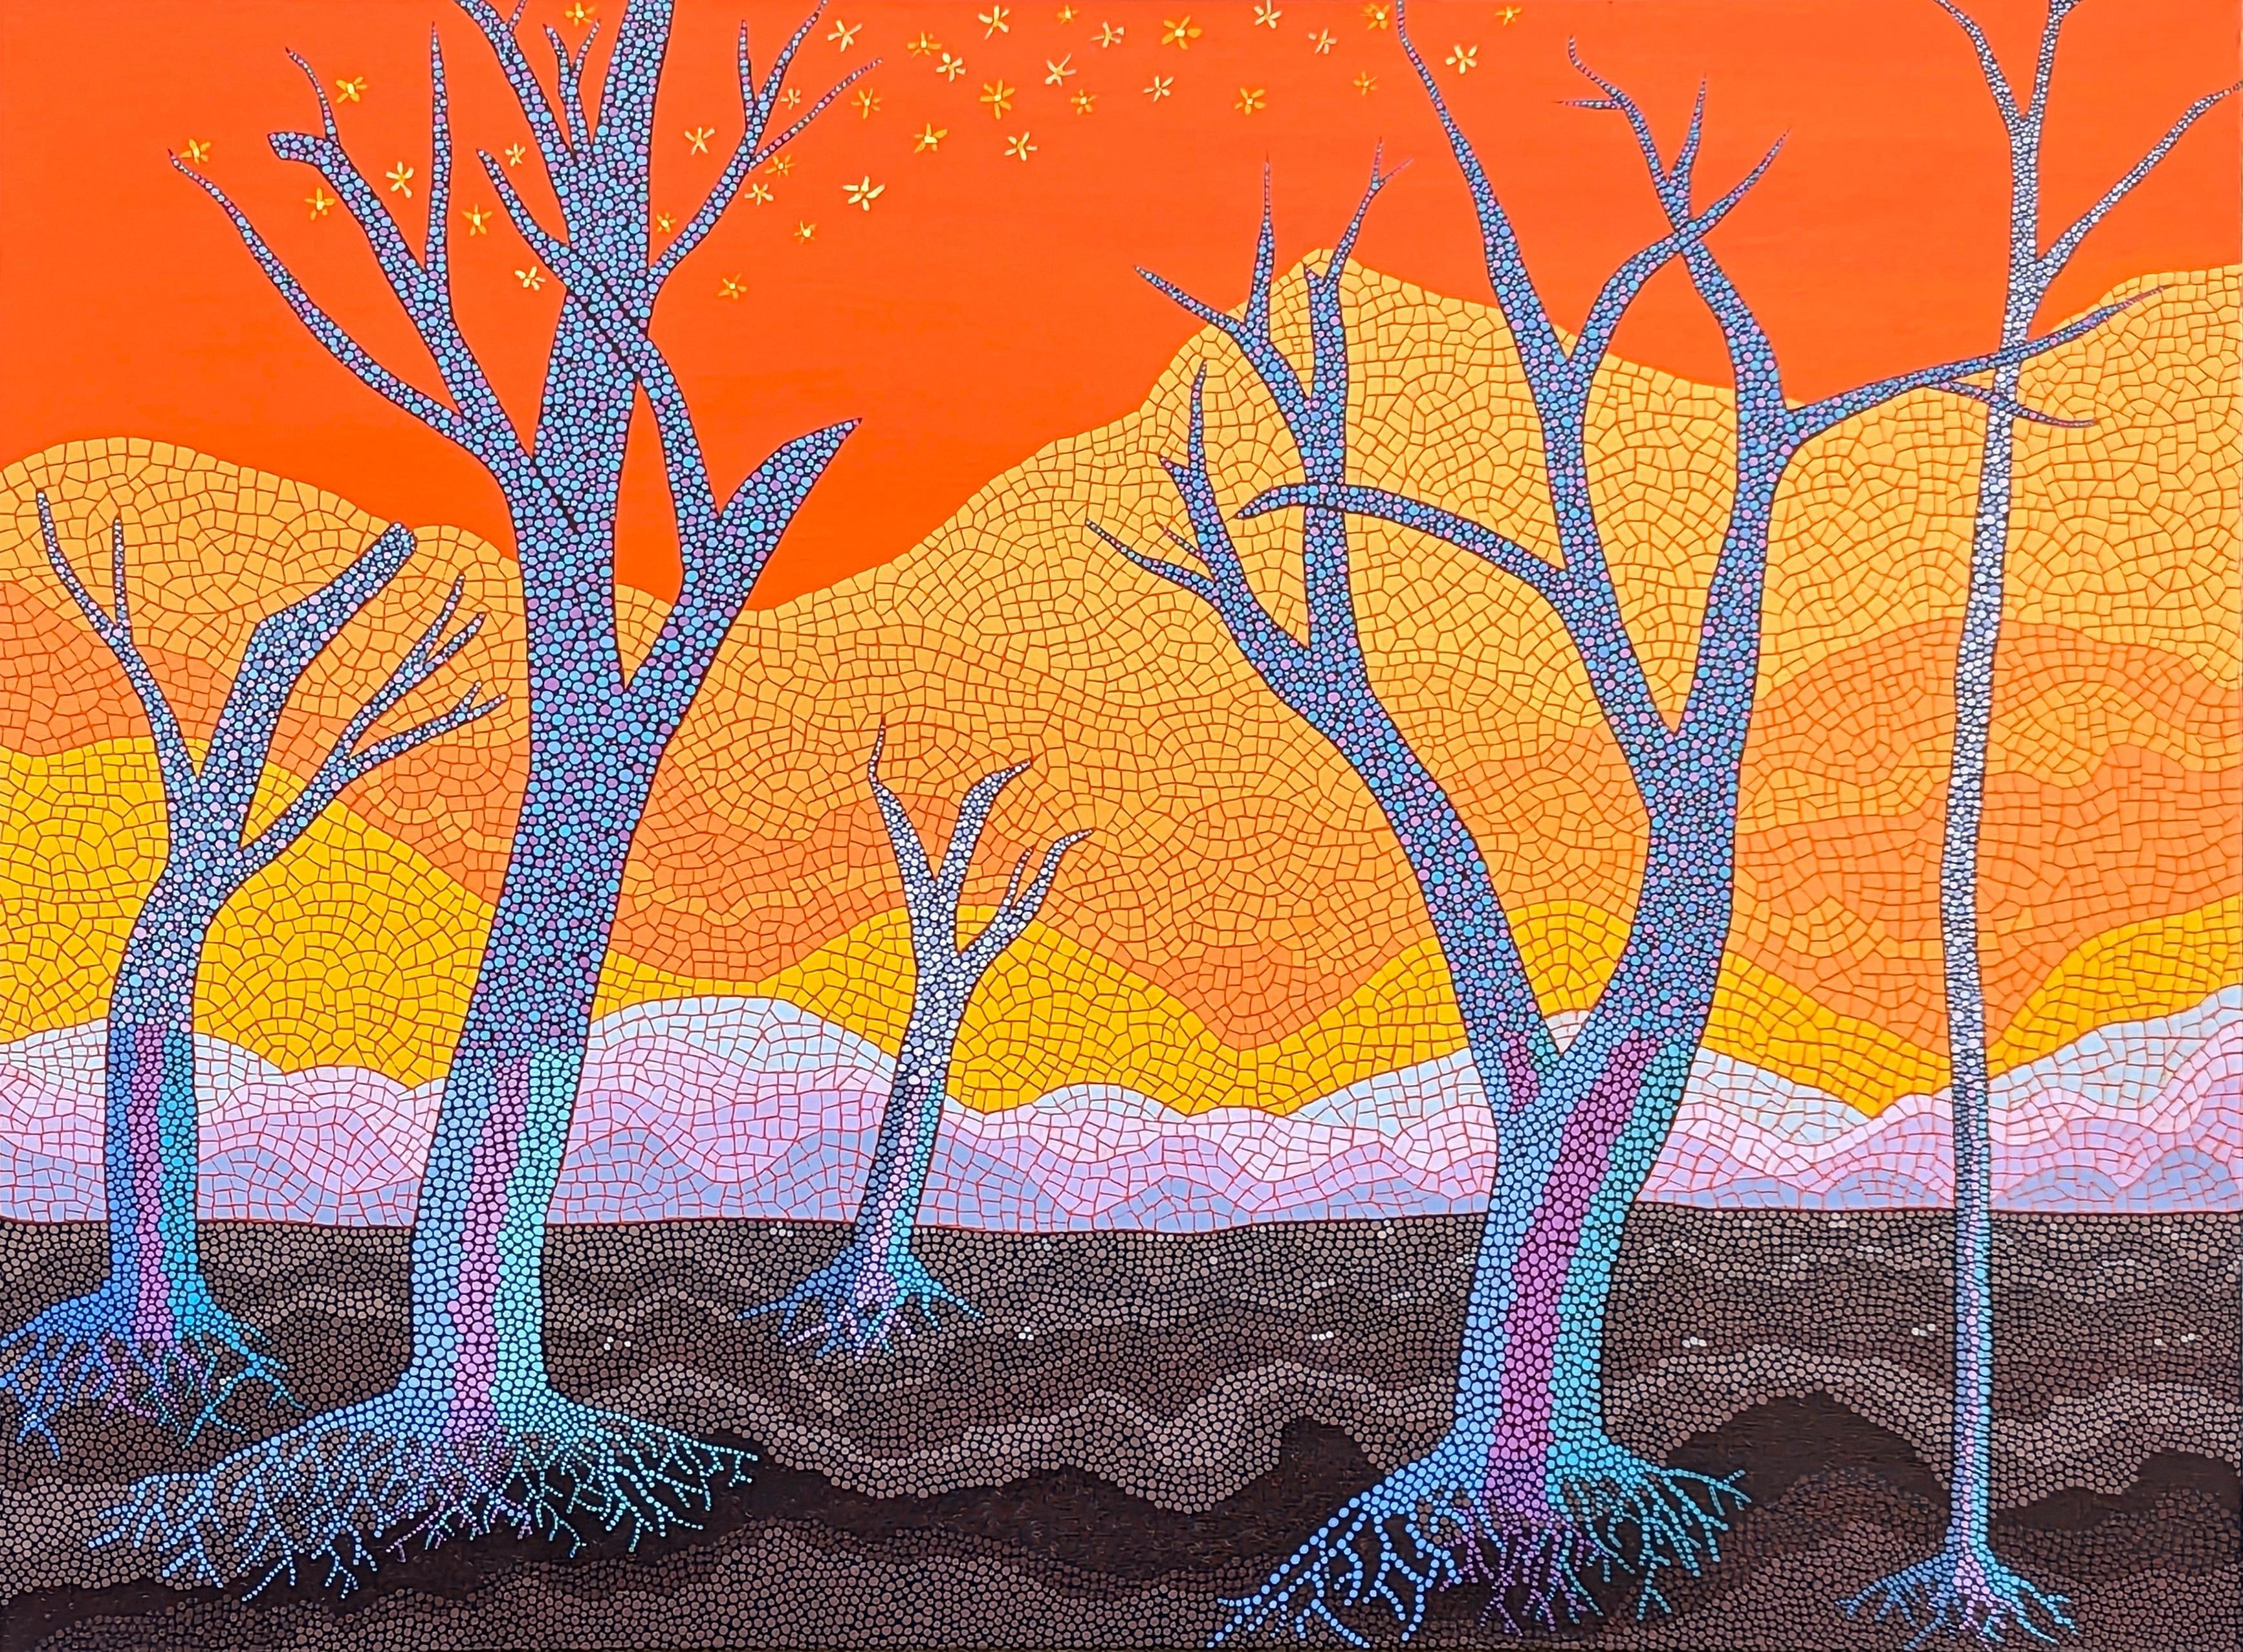 Marguerite Baldwin Landscape Painting - "I Love Trees #4" Warm-Toned Abstract Trees in Desert Mosaic-Style Painting